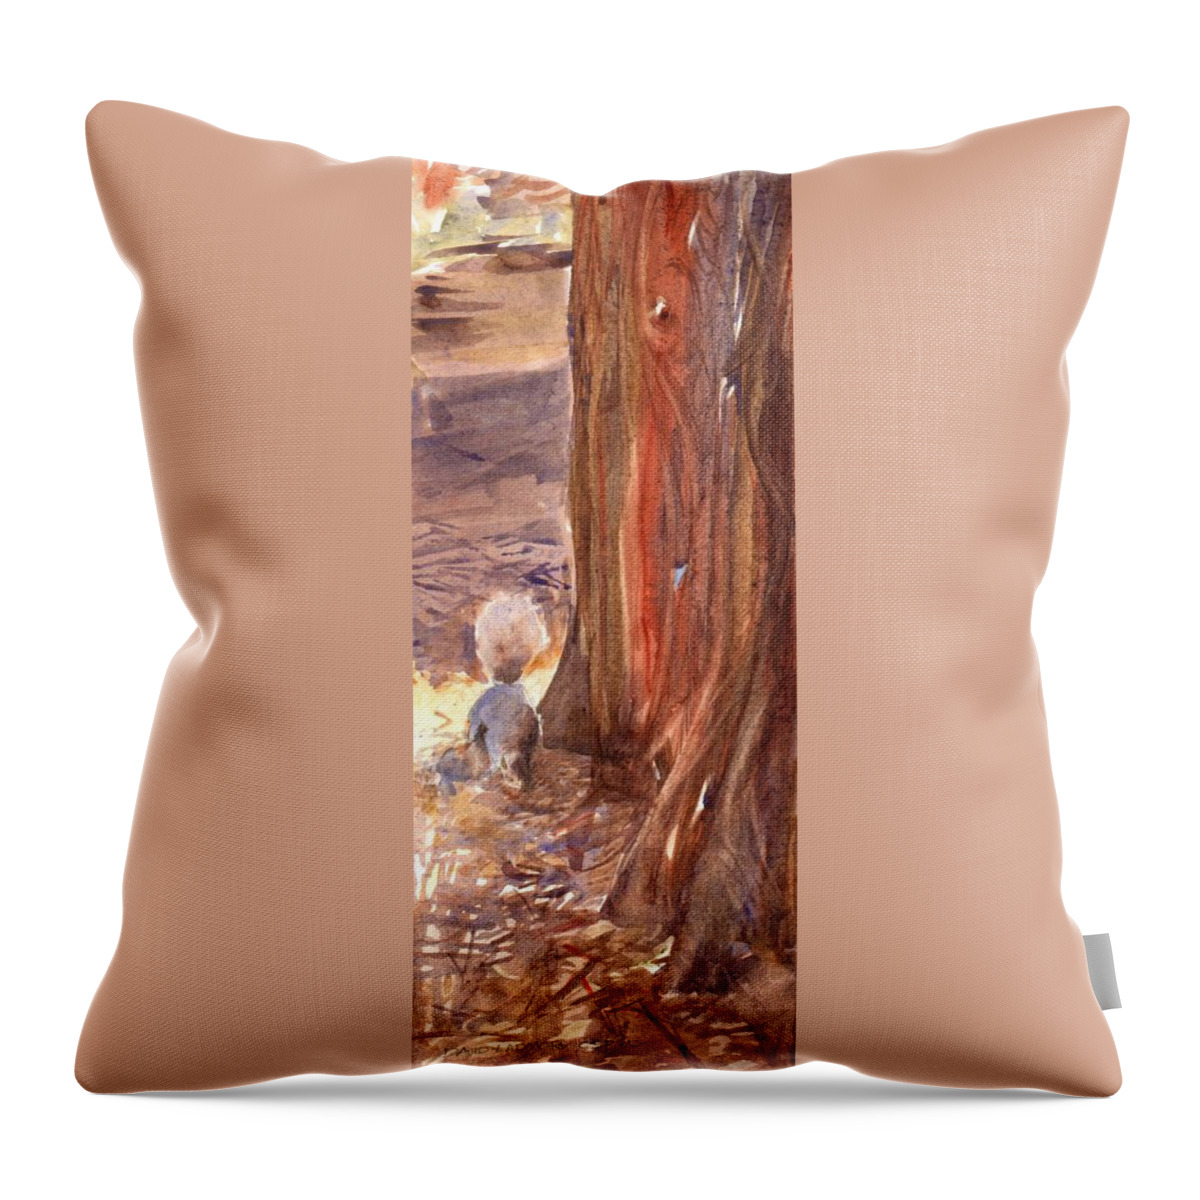 Squirrel Throw Pillow featuring the painting Squirrel by David Ladmore